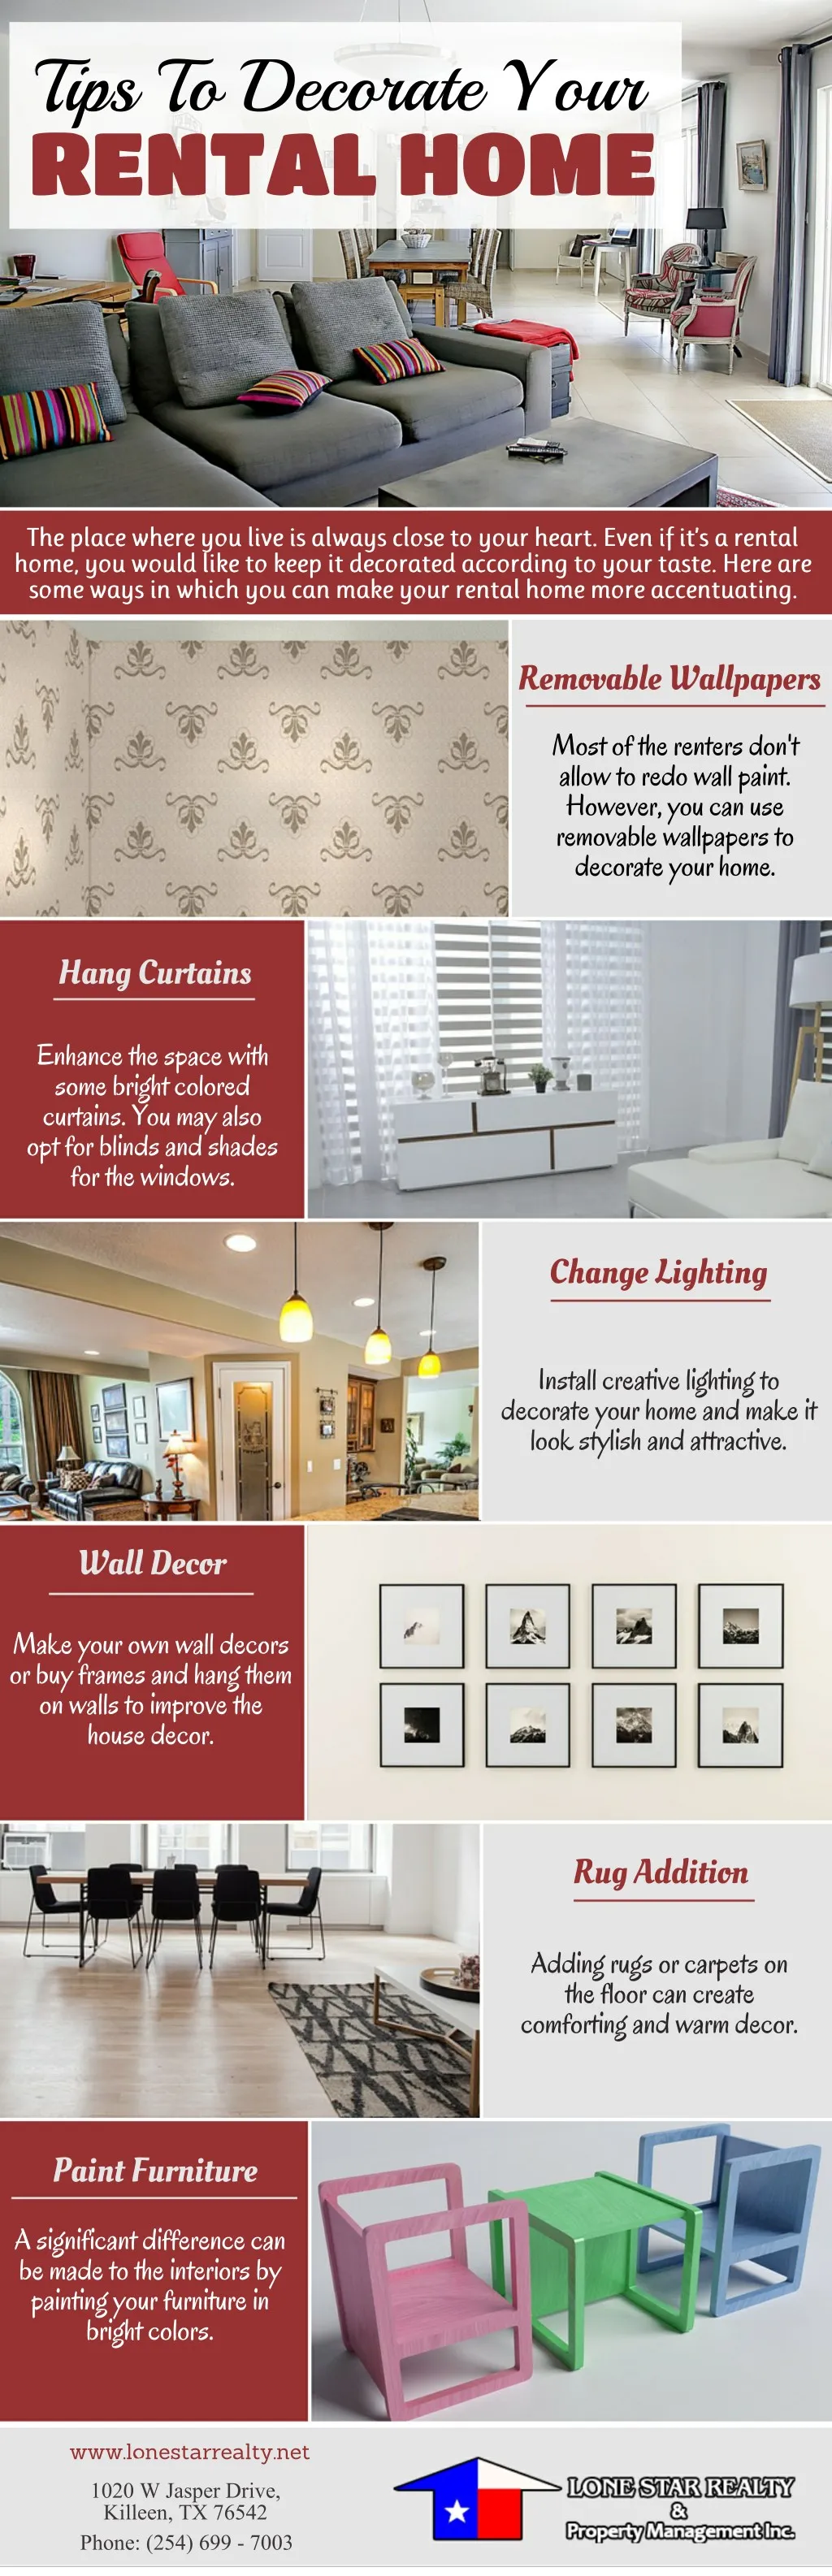 tips to decorate your rental home